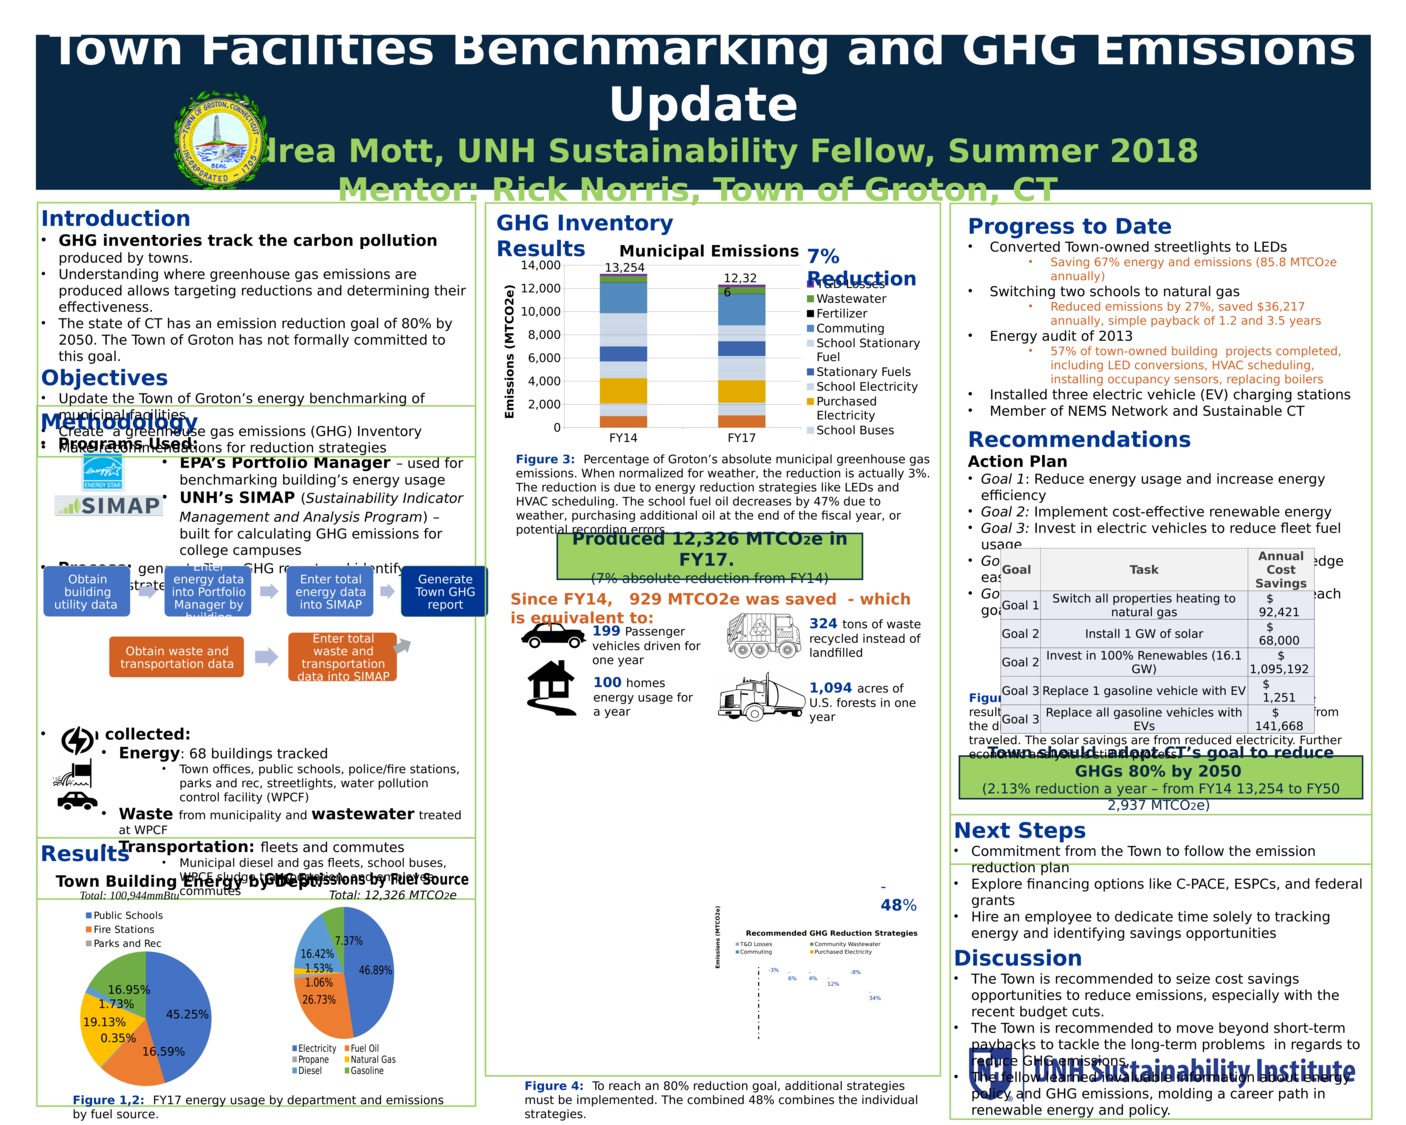 Town Facilities Benchmarking And Ghg Emissions Update by armott